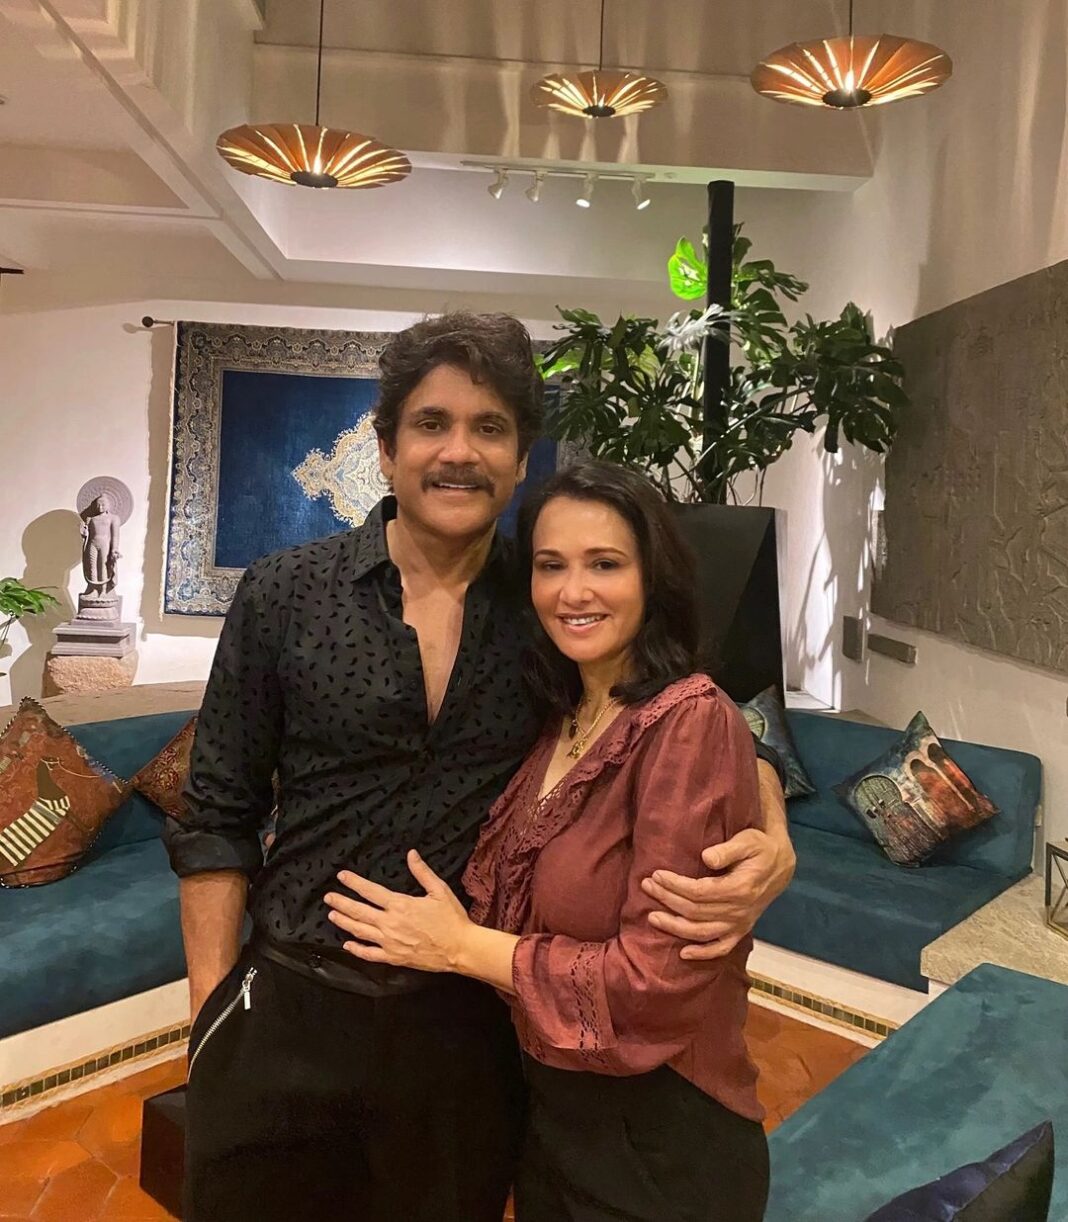 Amala Akkineni Instagram - A special birthday wish on this day, good health, happiness, satisfaction and much to look forward to, my love. So blessed to be with you... dearest Nag. To all the fans and well-wishers sending their greetings  - thank you and good wishes in return, stay safe.